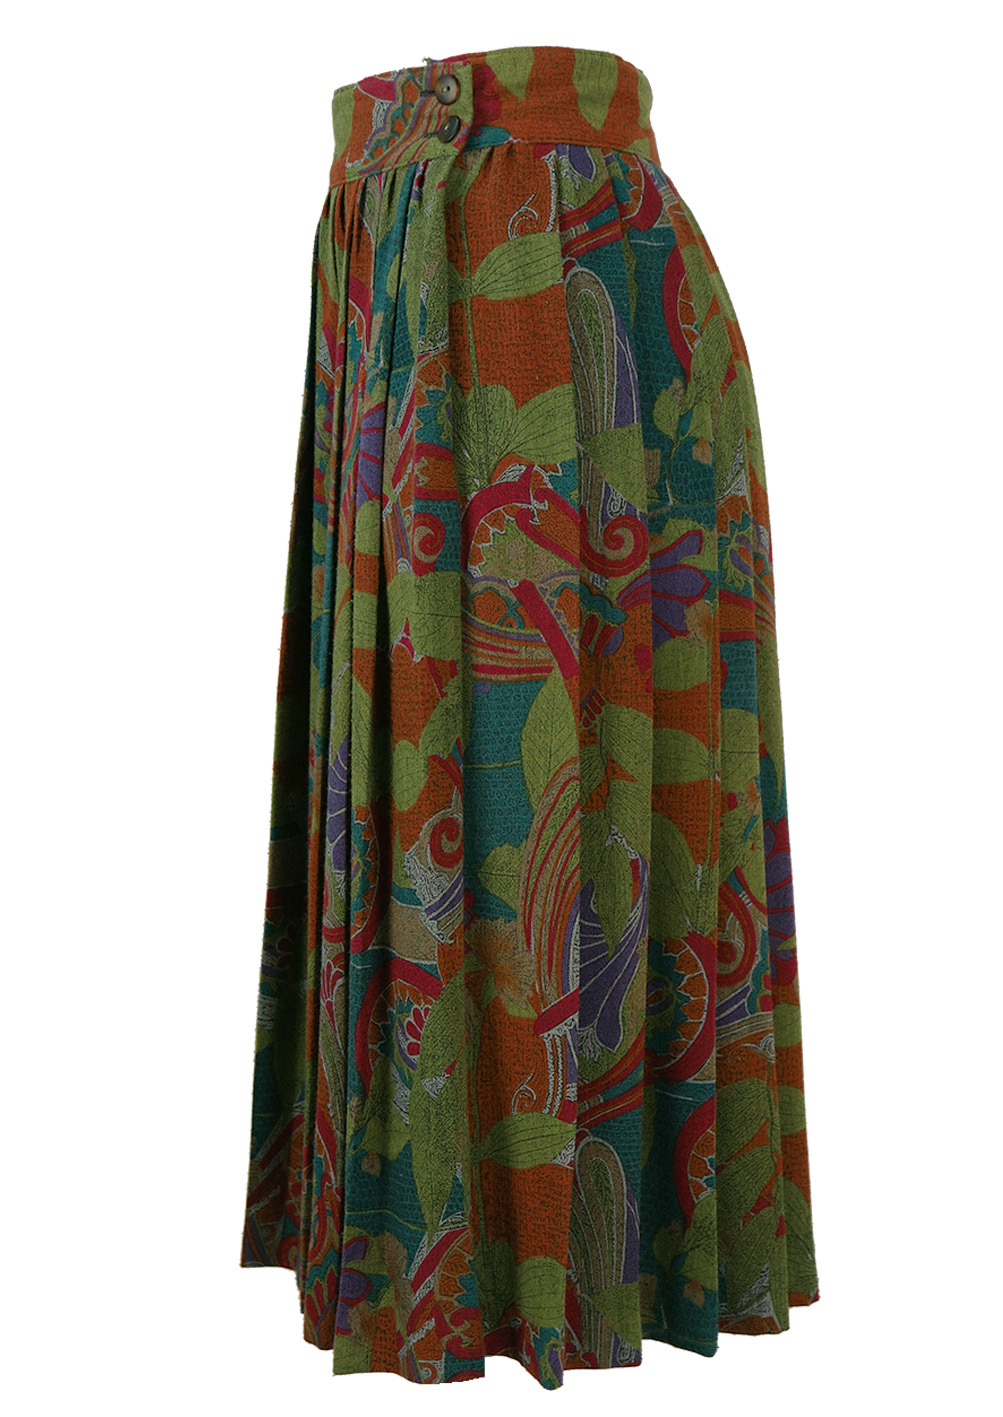 Midi Pleated Skirt with Abstract Floral Pattern - S/M | Reign Vintage